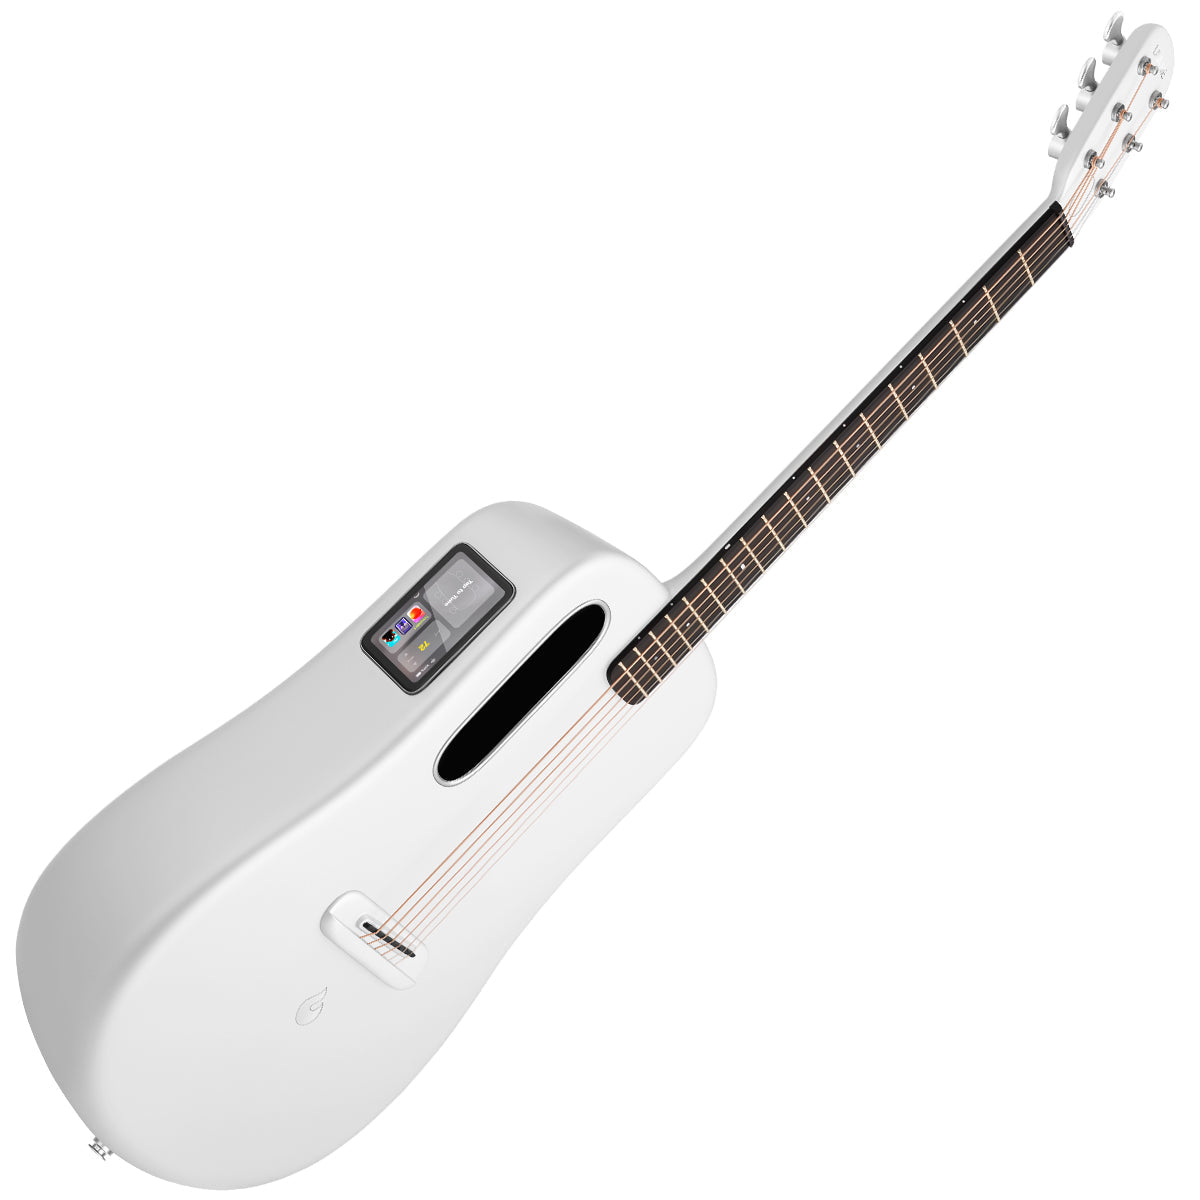 LAVA ME4 Carbon 38" with Space Bag ~ White, Acoustic Guitar for sale at Richards Guitars.